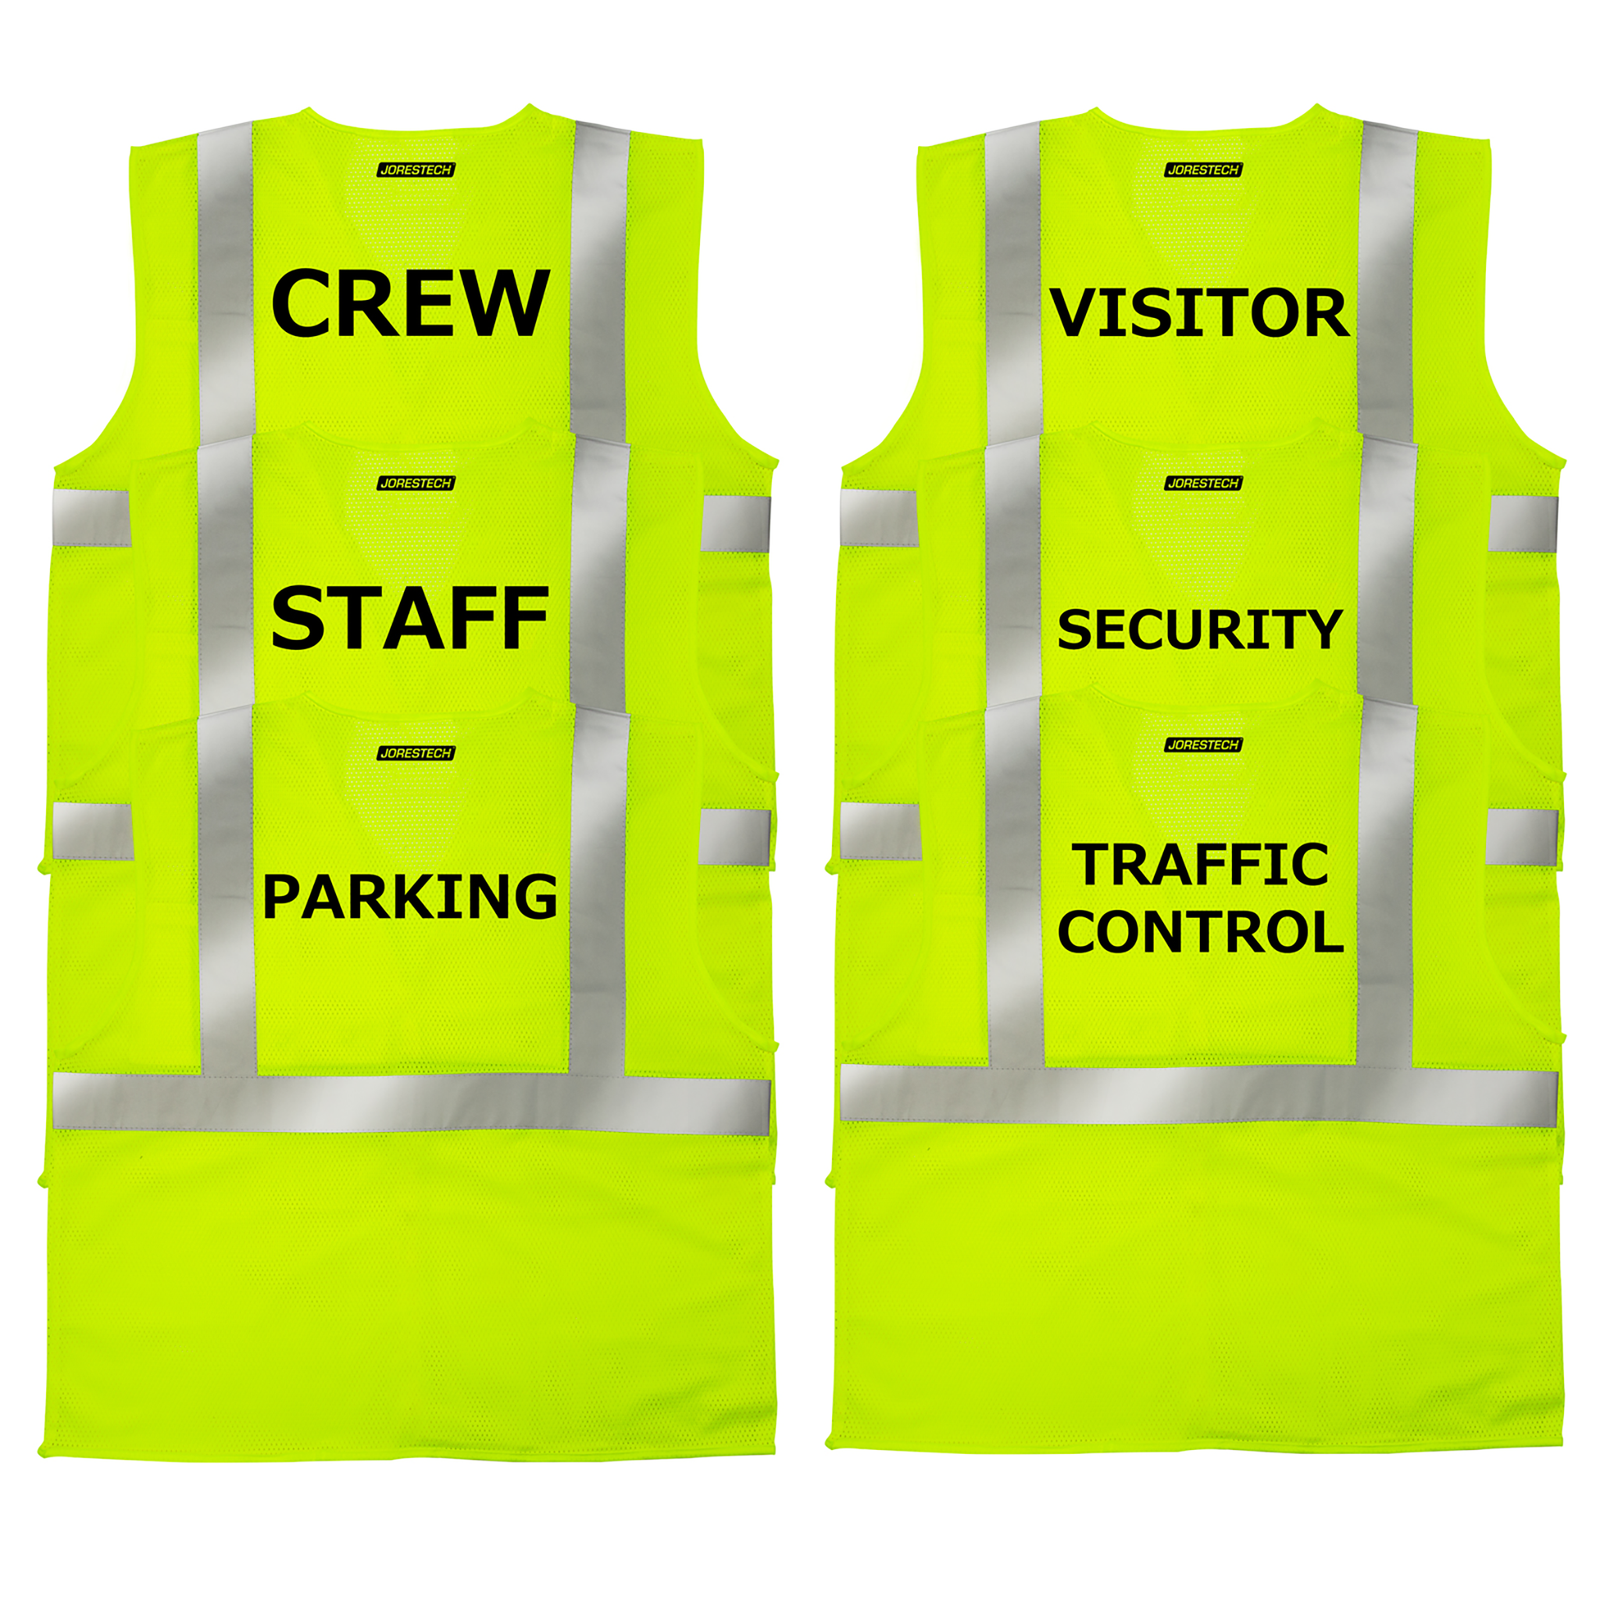 features 6 lime yellow JORESTECH safety vests printed with text and logo Prints read: traffic control, security, visitor, parking, staff and crew